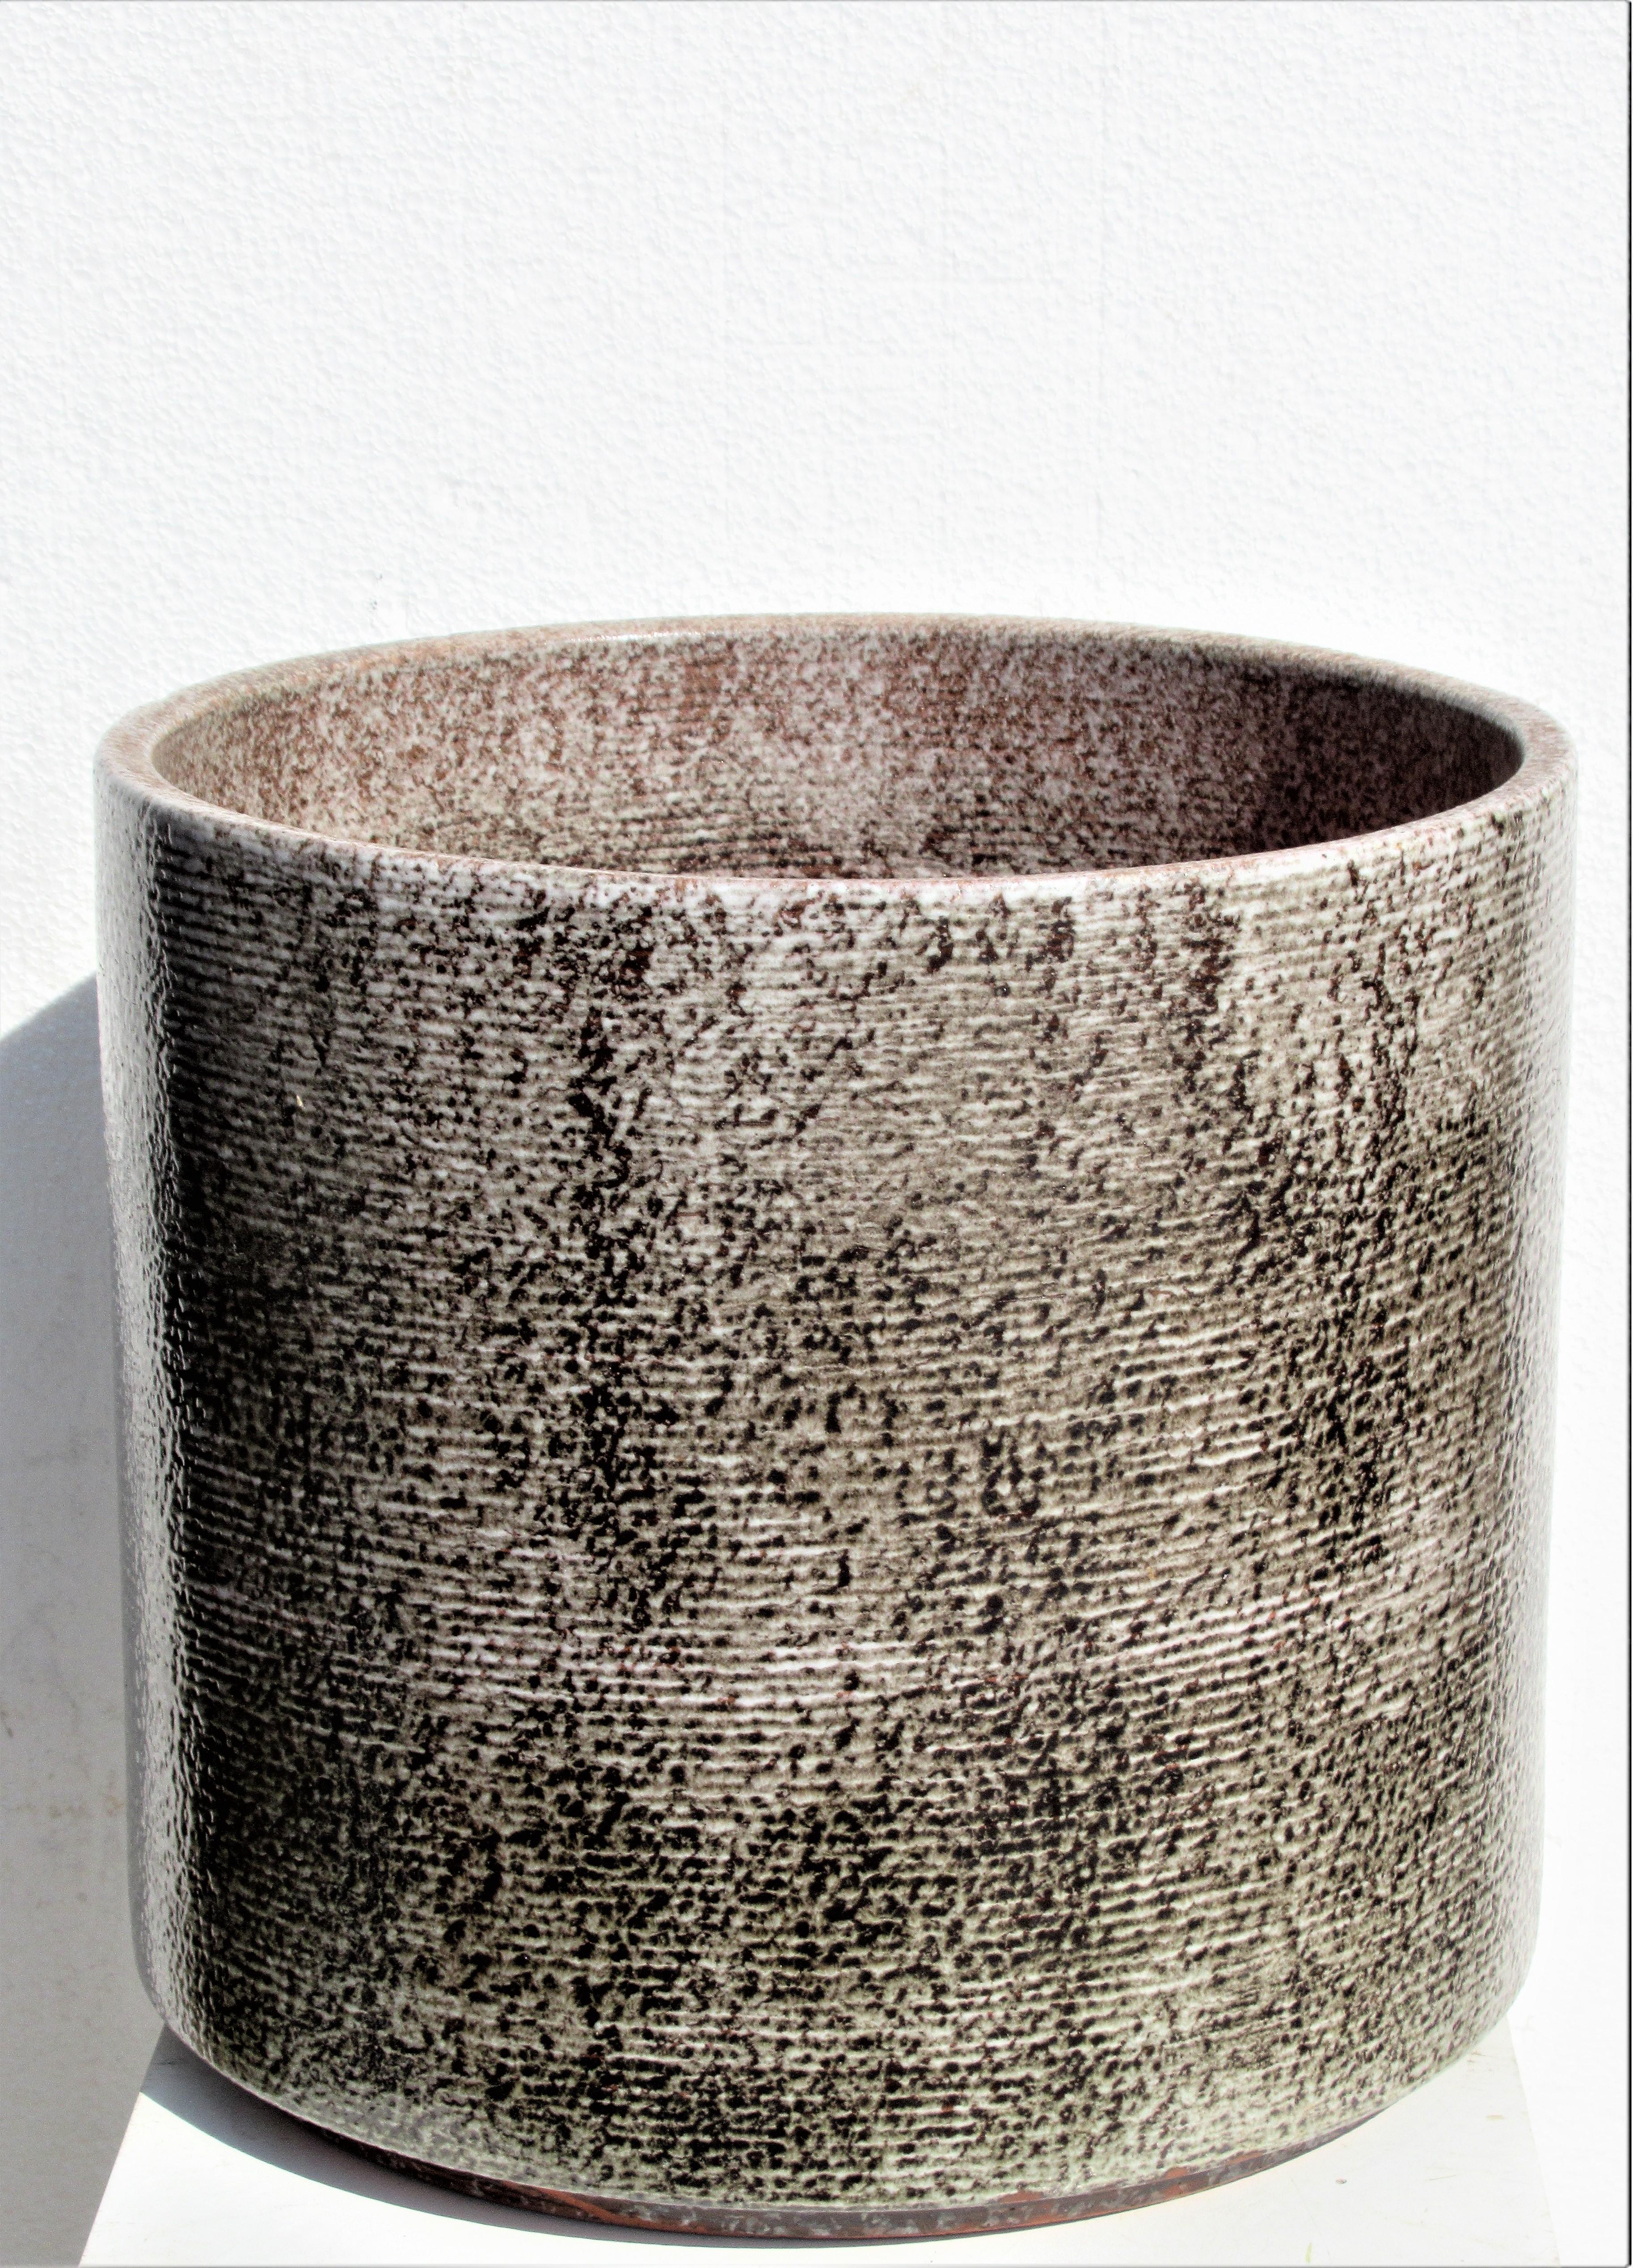 A very heavy and large beautifully textured multi-glazed cylindrical architectural pottery jardinière planter by Gainey Ceramics, U.S.A. La Verne, Calif, model number AC-16. Attributed to David Cressey, circa 1960.